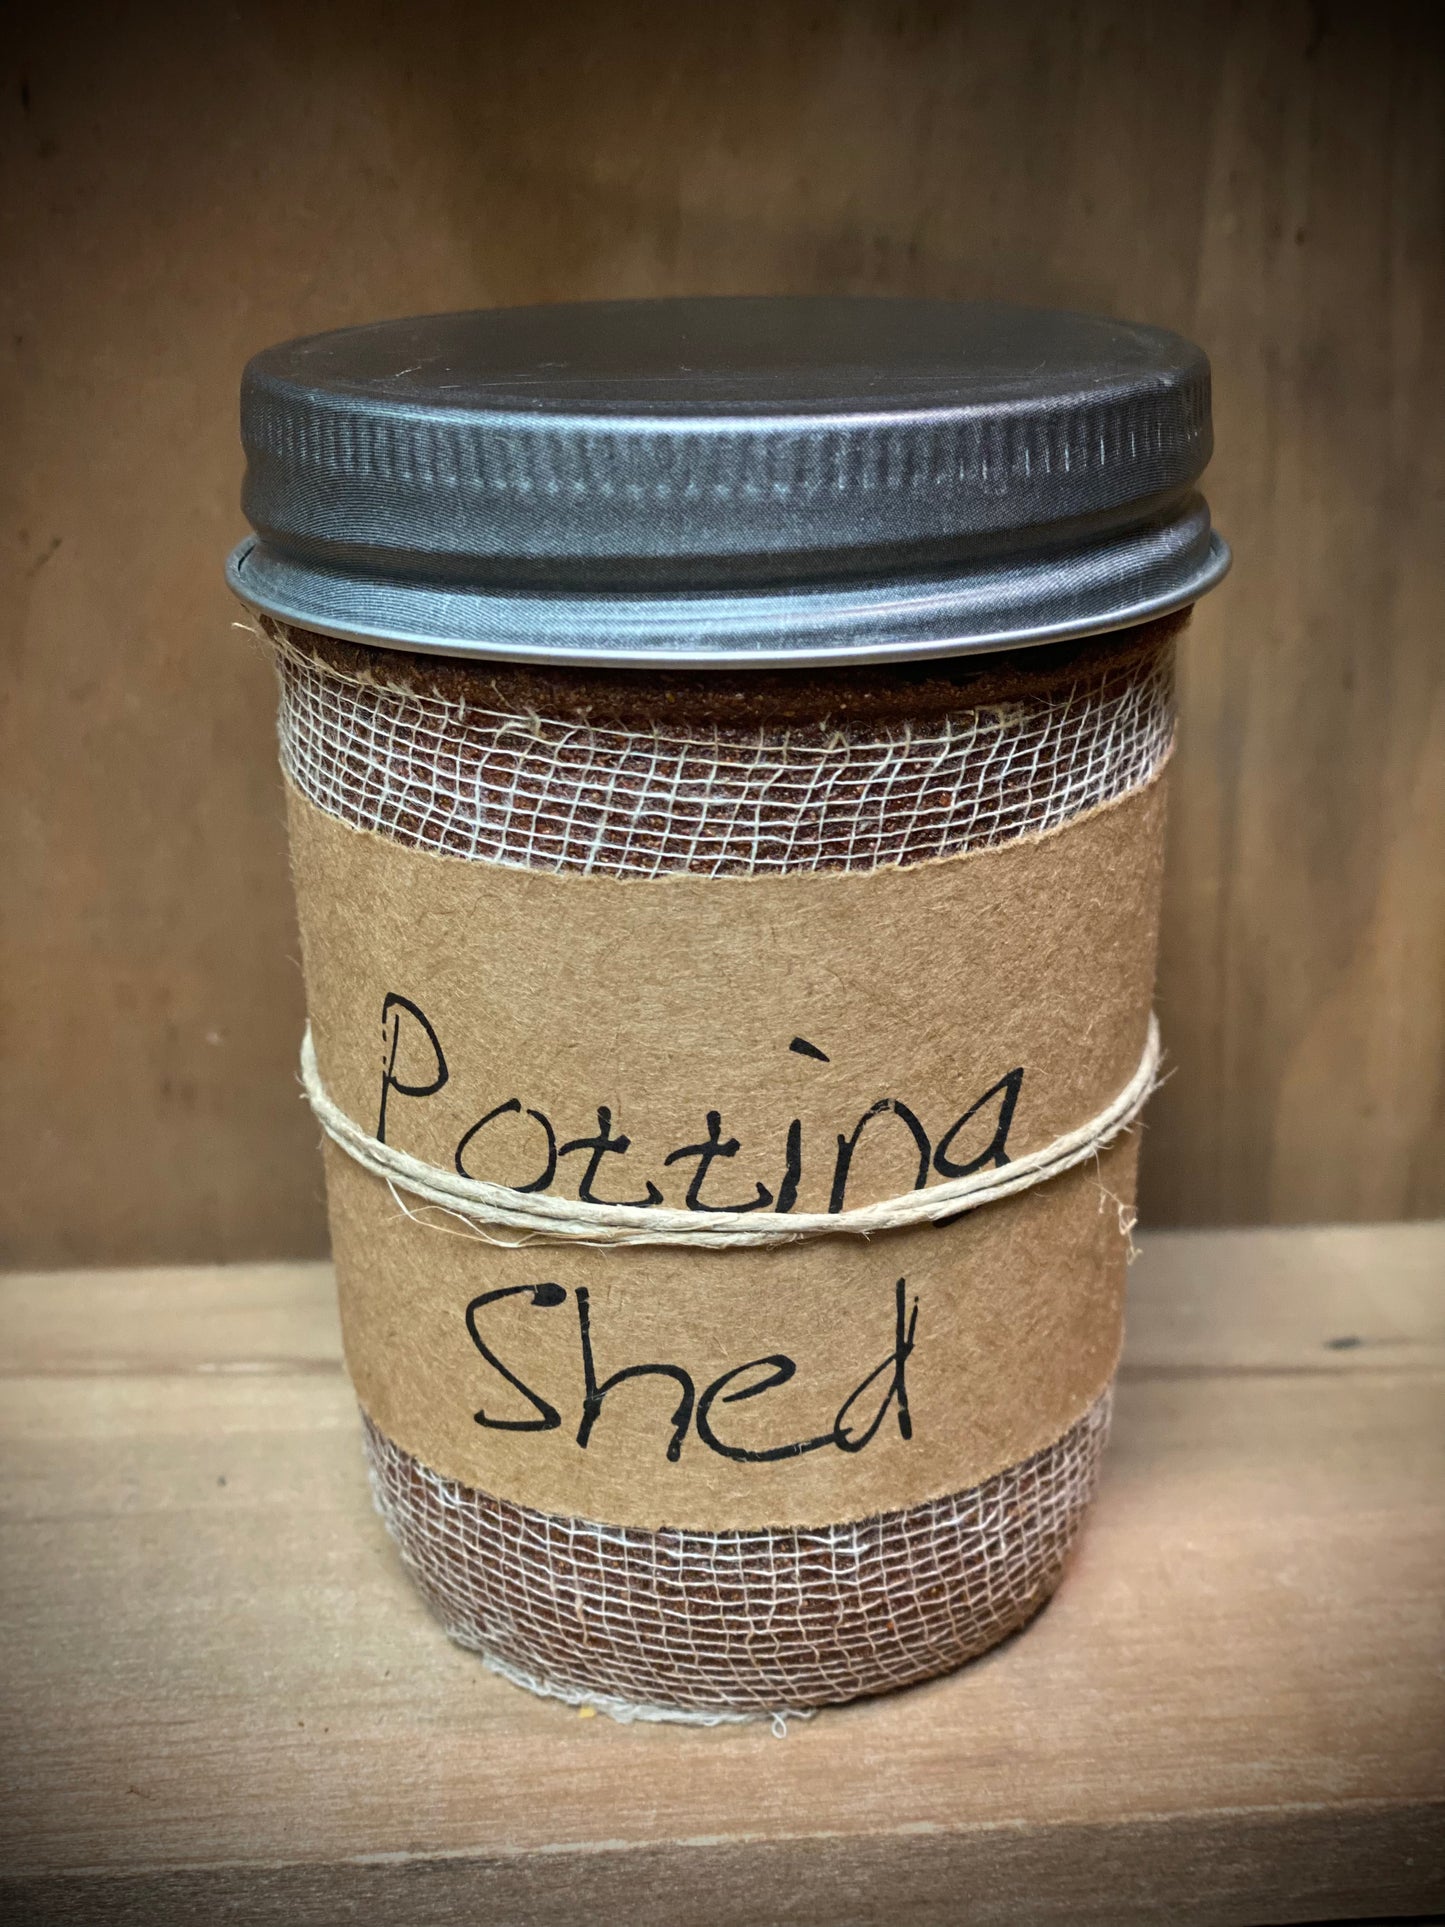 POTTING SHED, 8 ounce